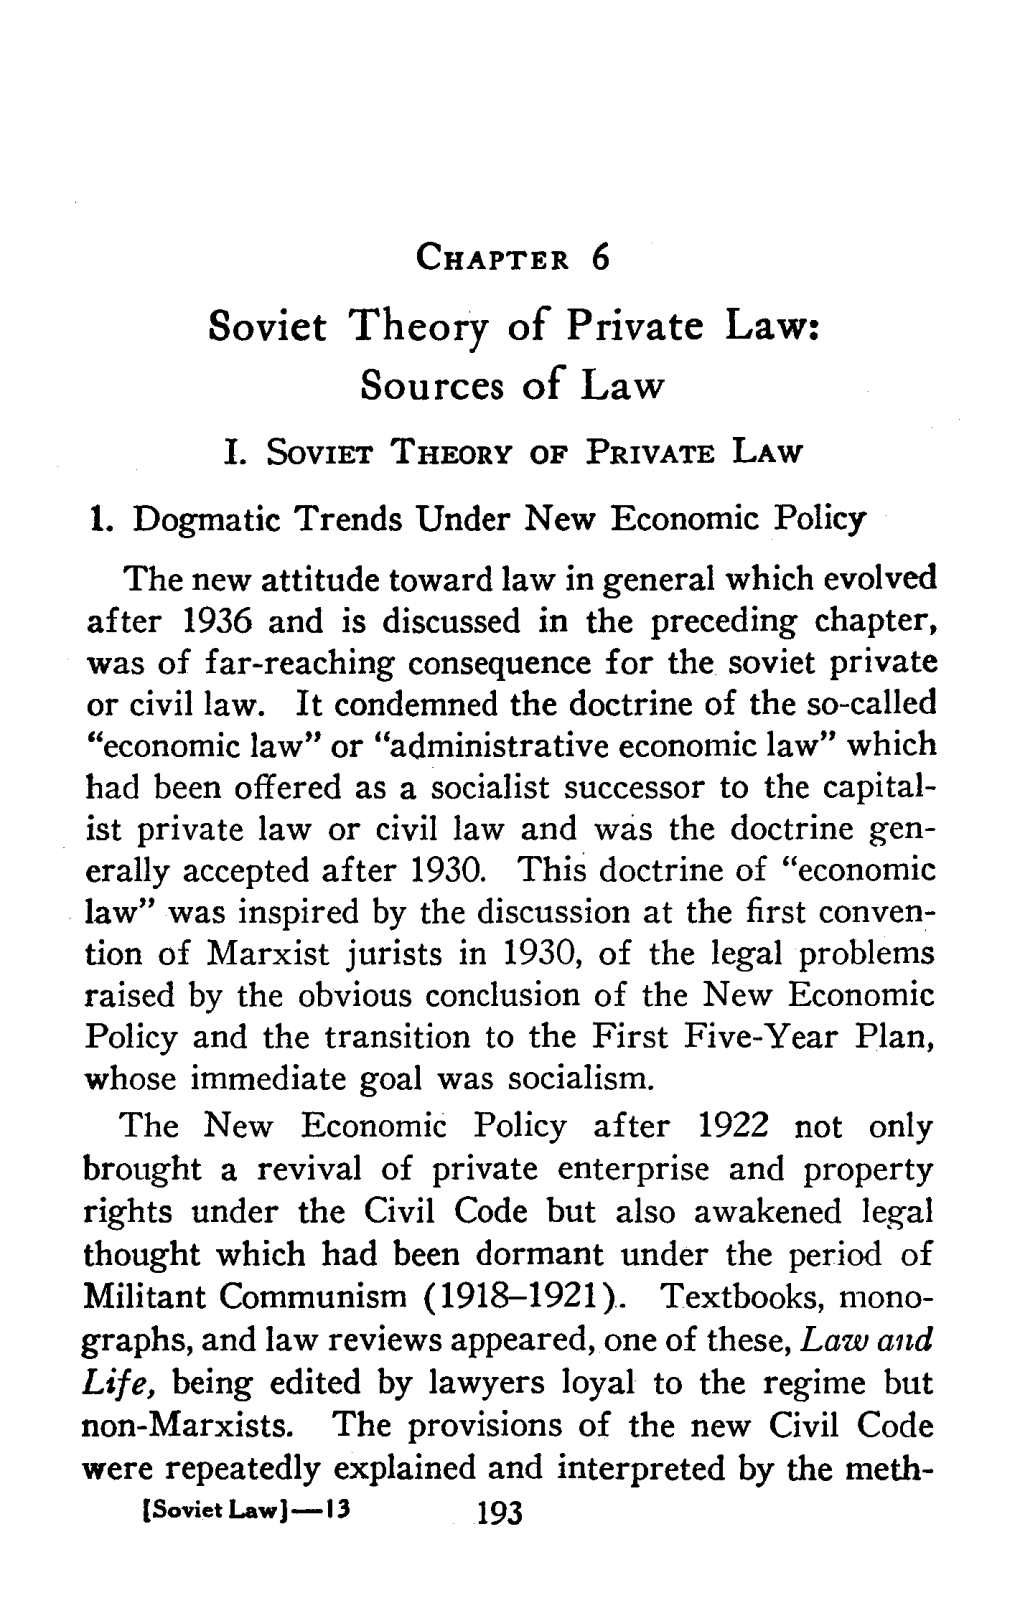 Soviet Theory of Private Law: Sources of Law